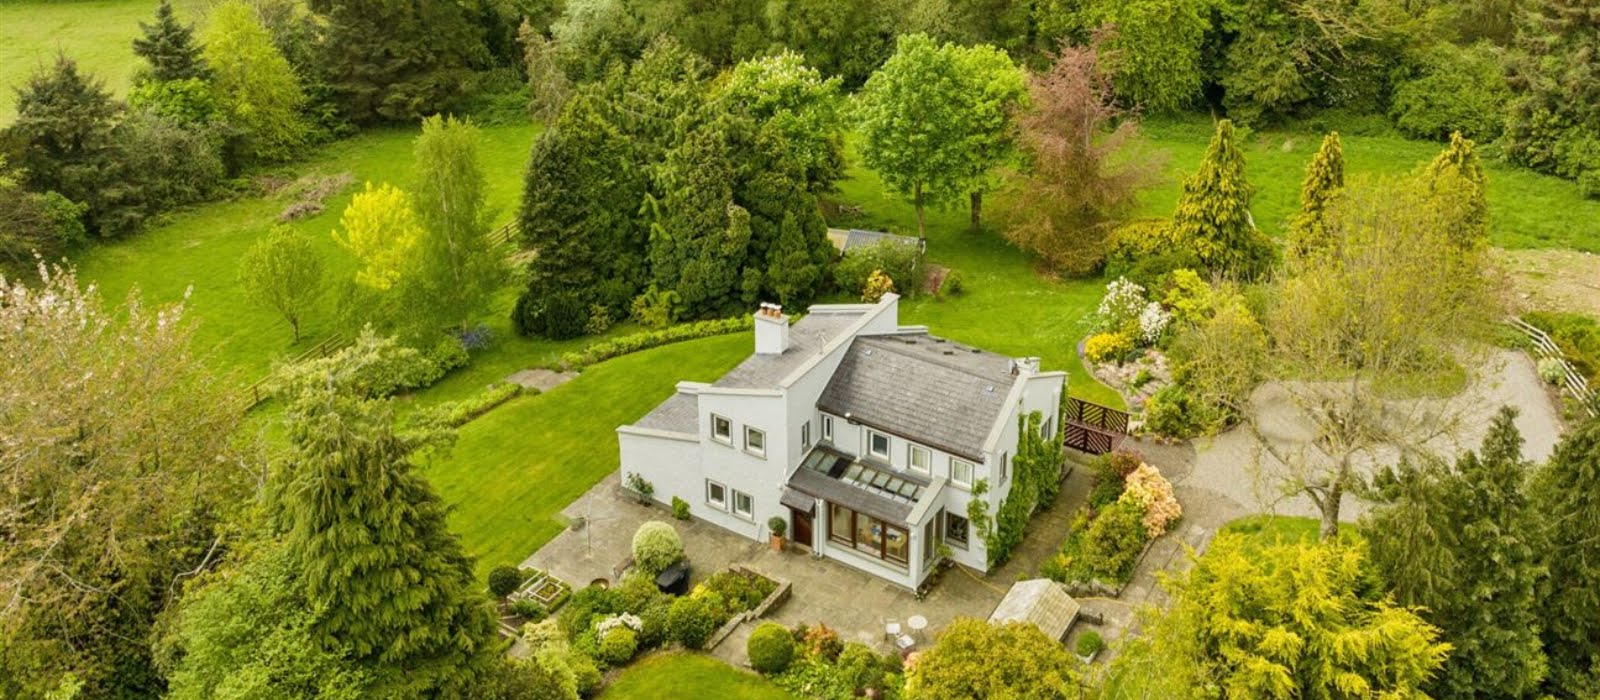 This picturesque, split-level home in Delgany is on the market for €945,000